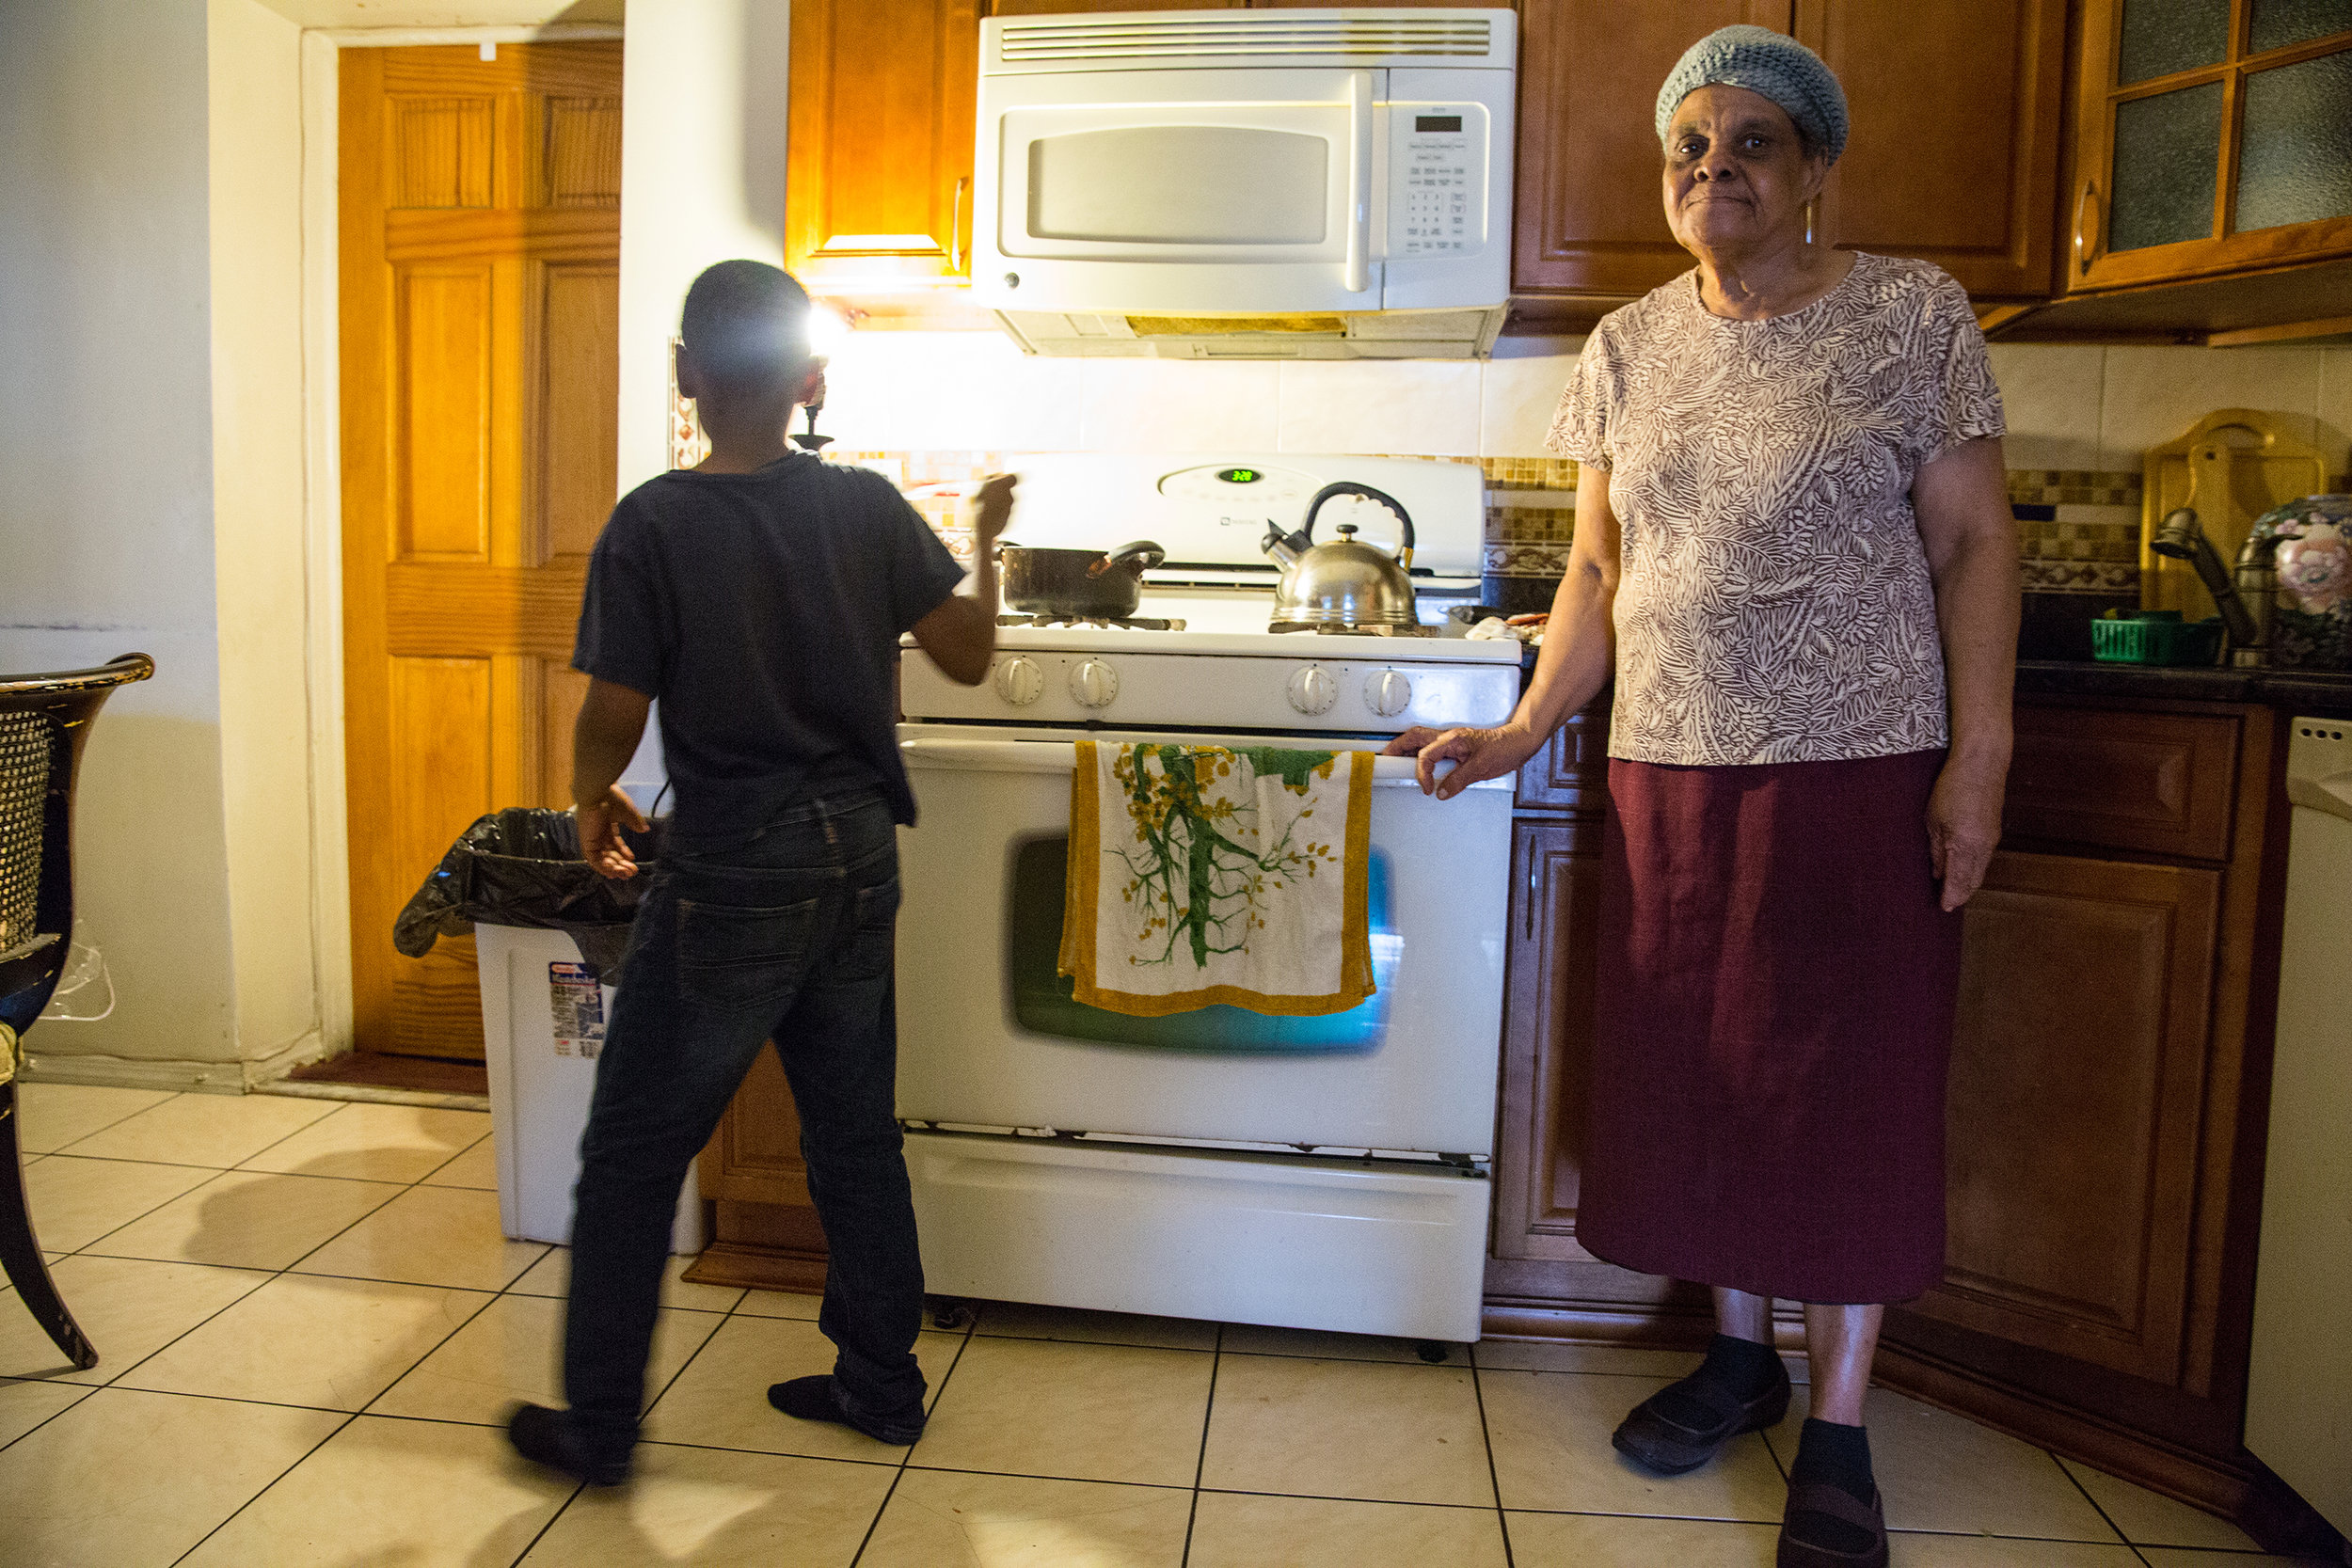  Grandmothers are familiar faces on the pantry lines. Nora Balfour is 74 and a great-grandmother, but she still calls her husband “Lover” when he calls her after church. He’s in Jamaica, while she’s in the Bronx with her son, his wife, and their chil